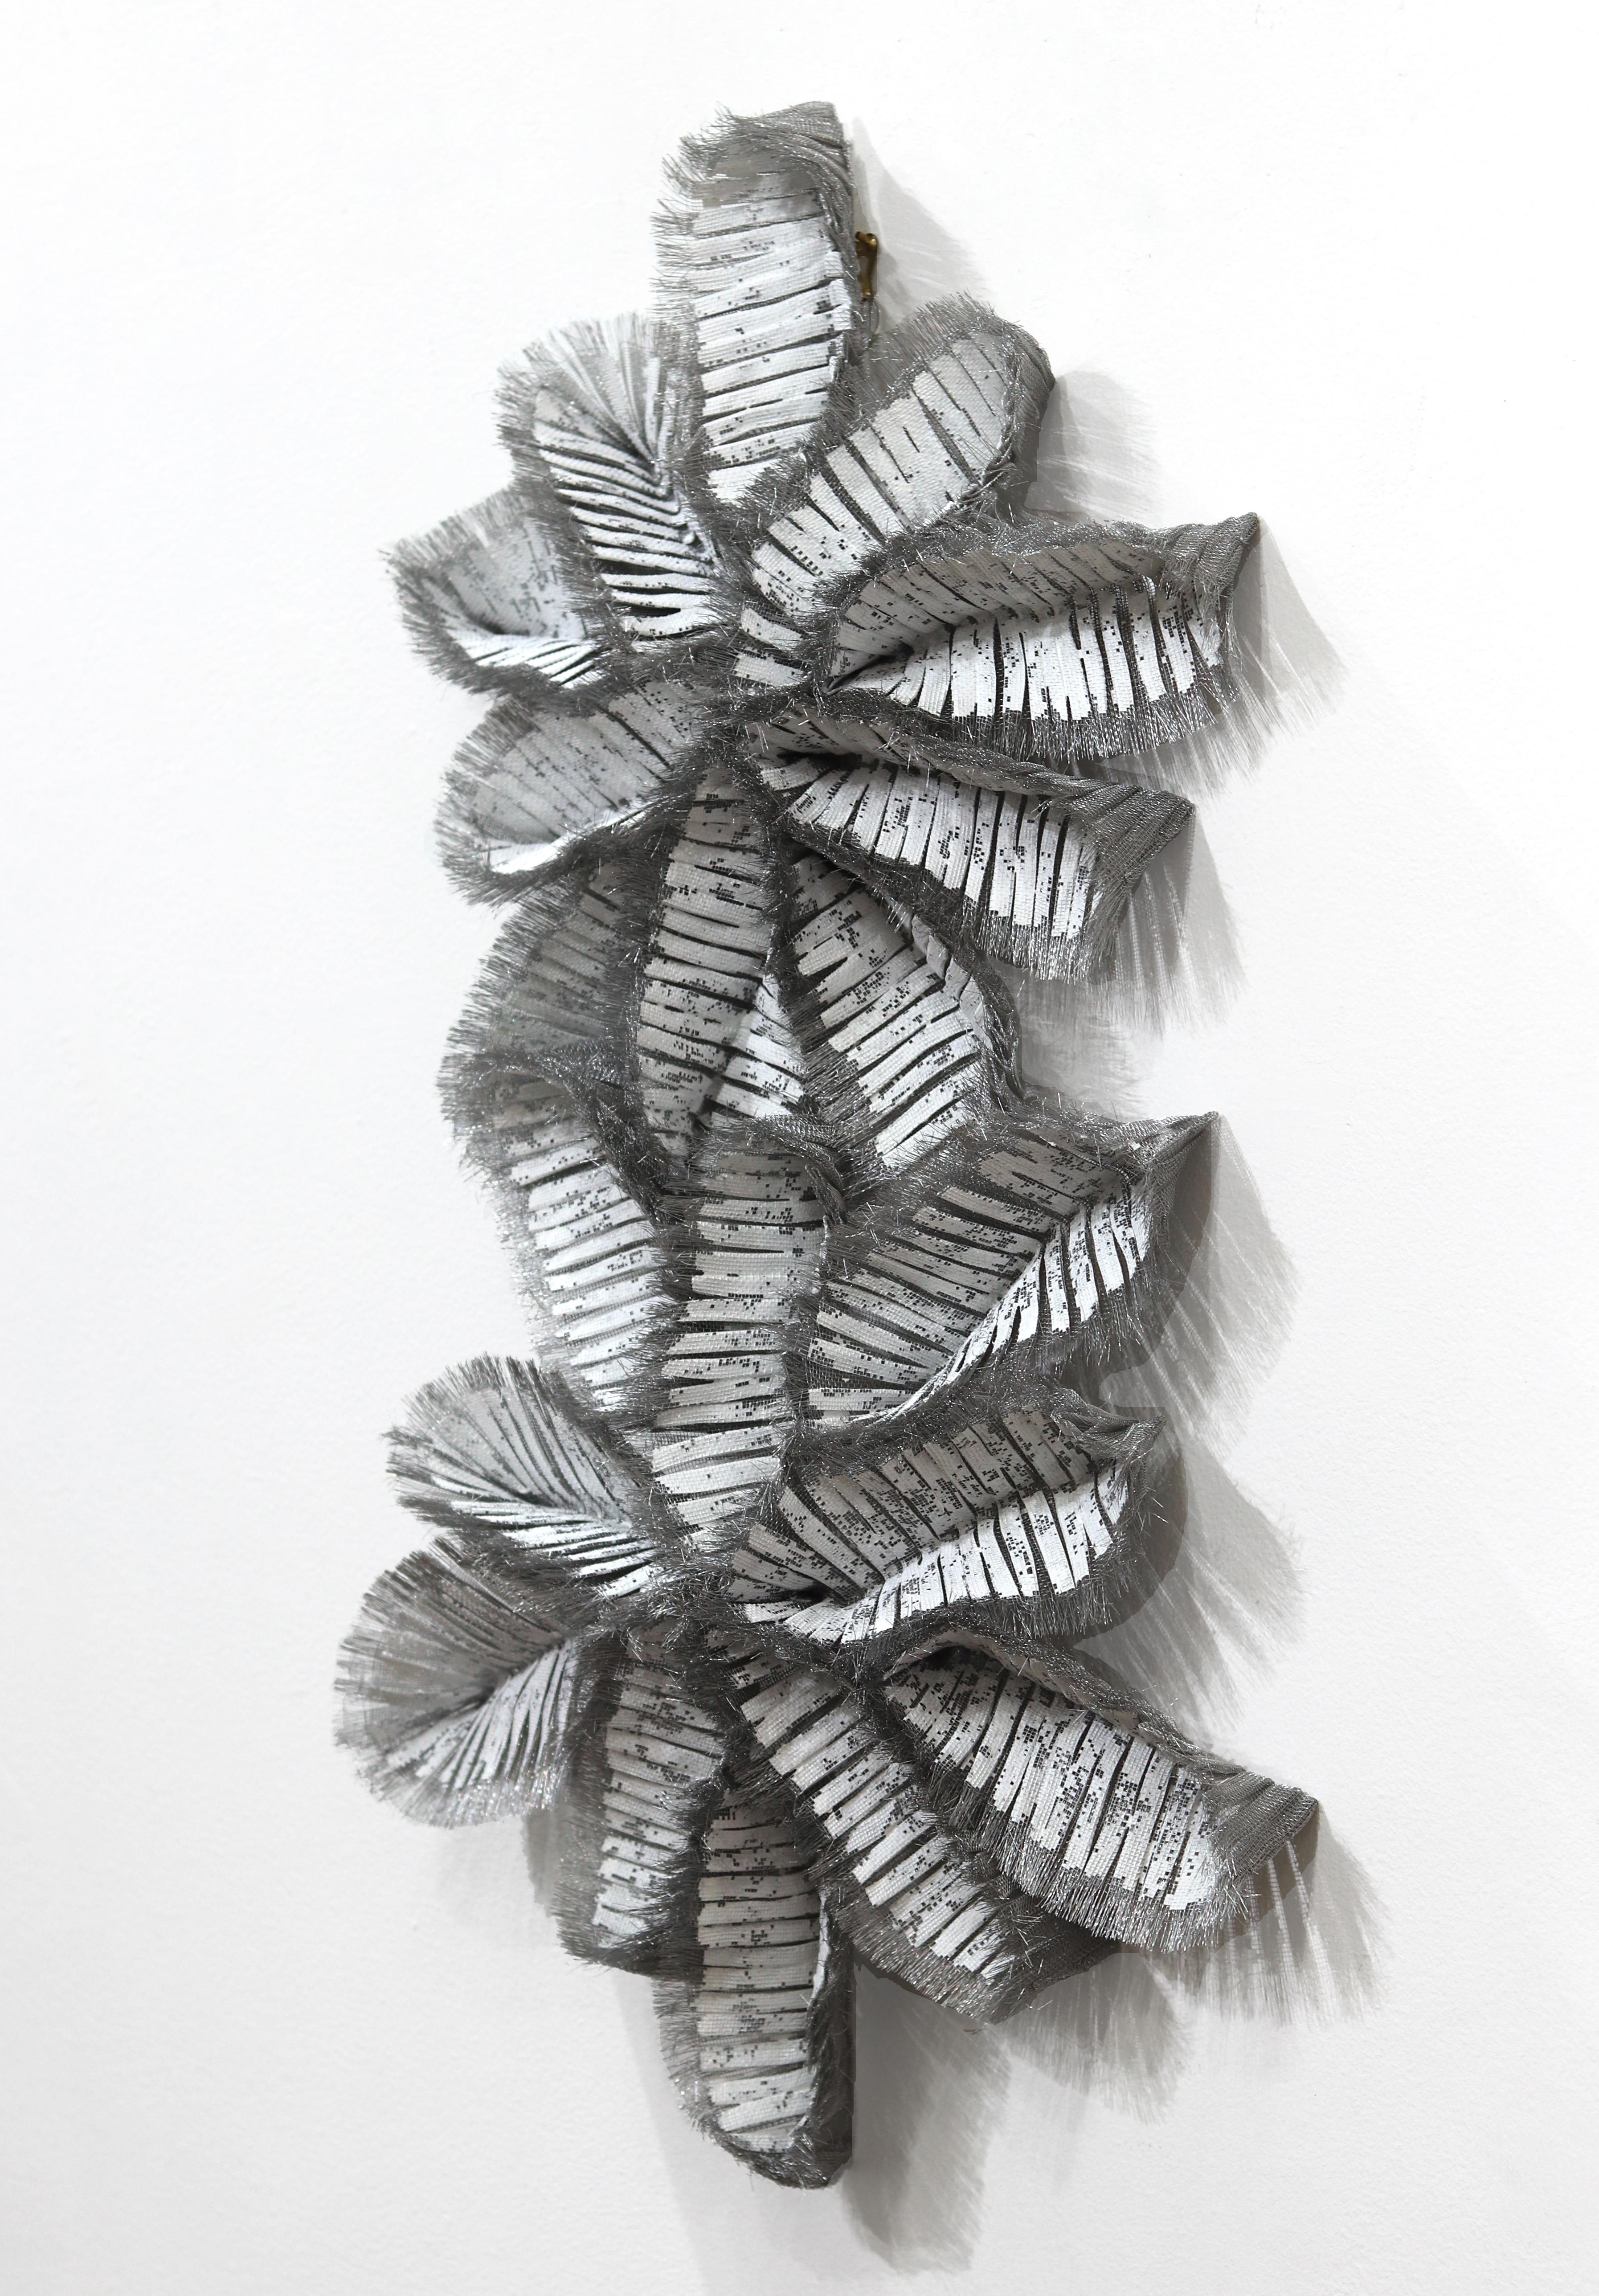 Atticus Adams' organically composed modern metal sculptures embody the transformative power of contemporary art, illustrating the creation of beauty, meaning, and emotional impact from industrial materials. Using mostly aluminum mesh—generally found